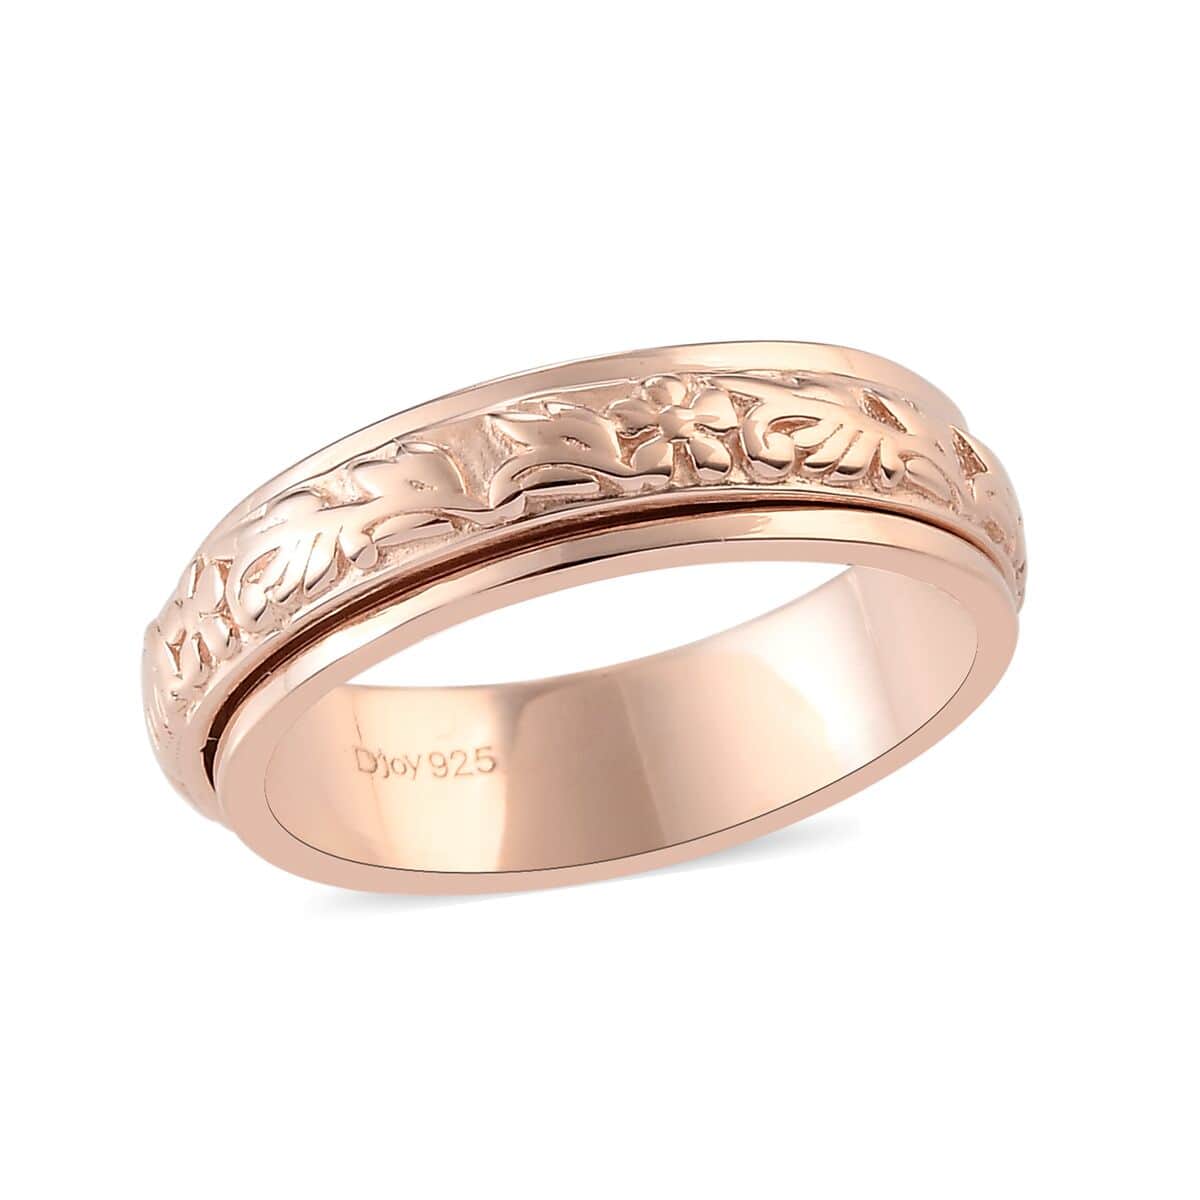 Floral Fidget Spinner Ring for Anxiety in Vermeil Rose Gold Over Sterling Silver, Anxiety Ring for Women, Fidget Rings for Anxiety, Stress Relieving Anxiety Ring, Promise Rings 4.50 Grams (Size 11) image number 0